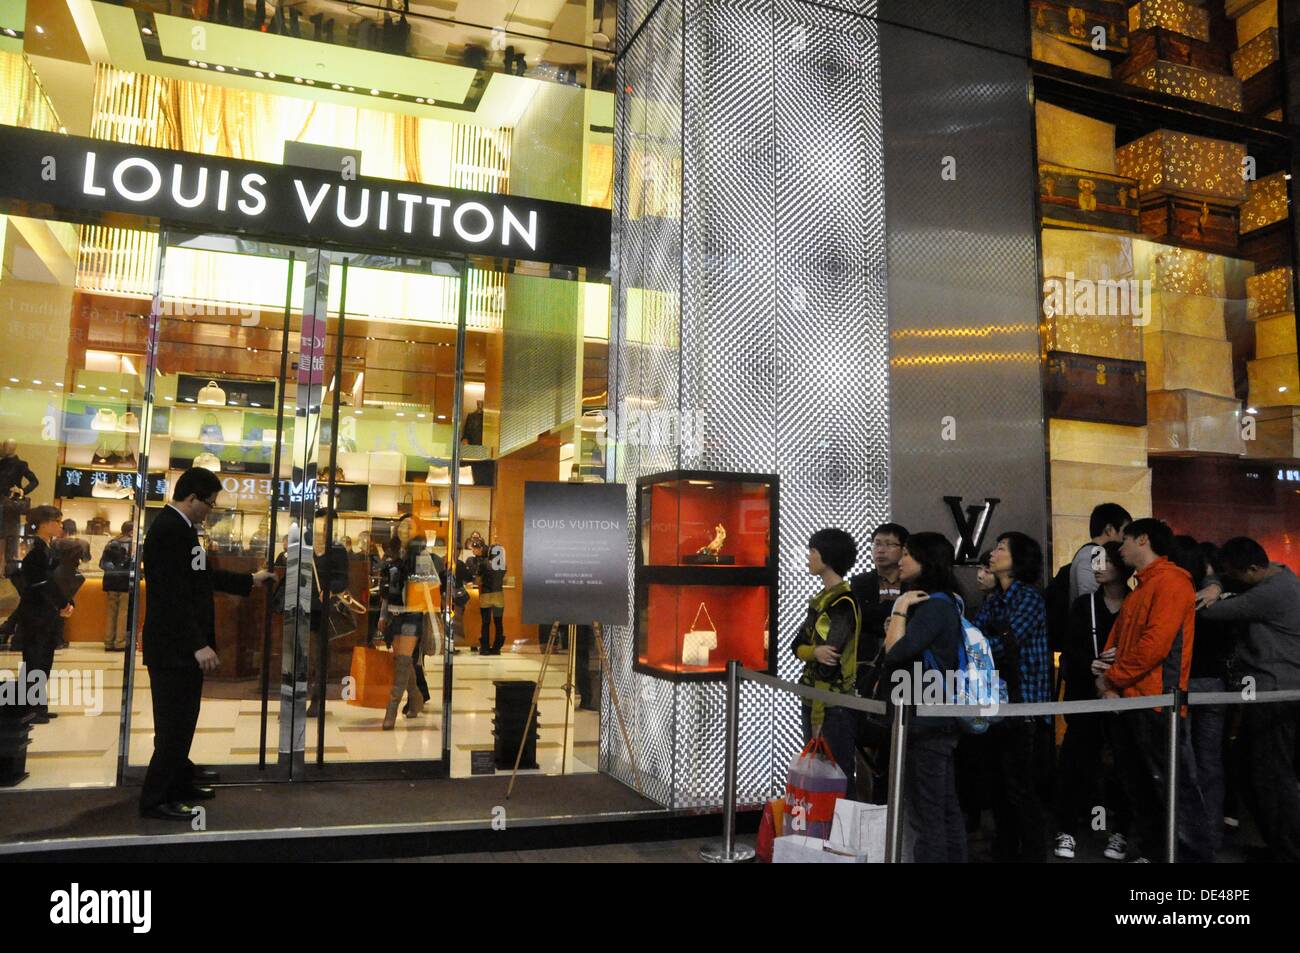 Hong Kong: people in line in front a Louis Vuitton shop in Tsim Sha Stock Photo: 60330998 - Alamy